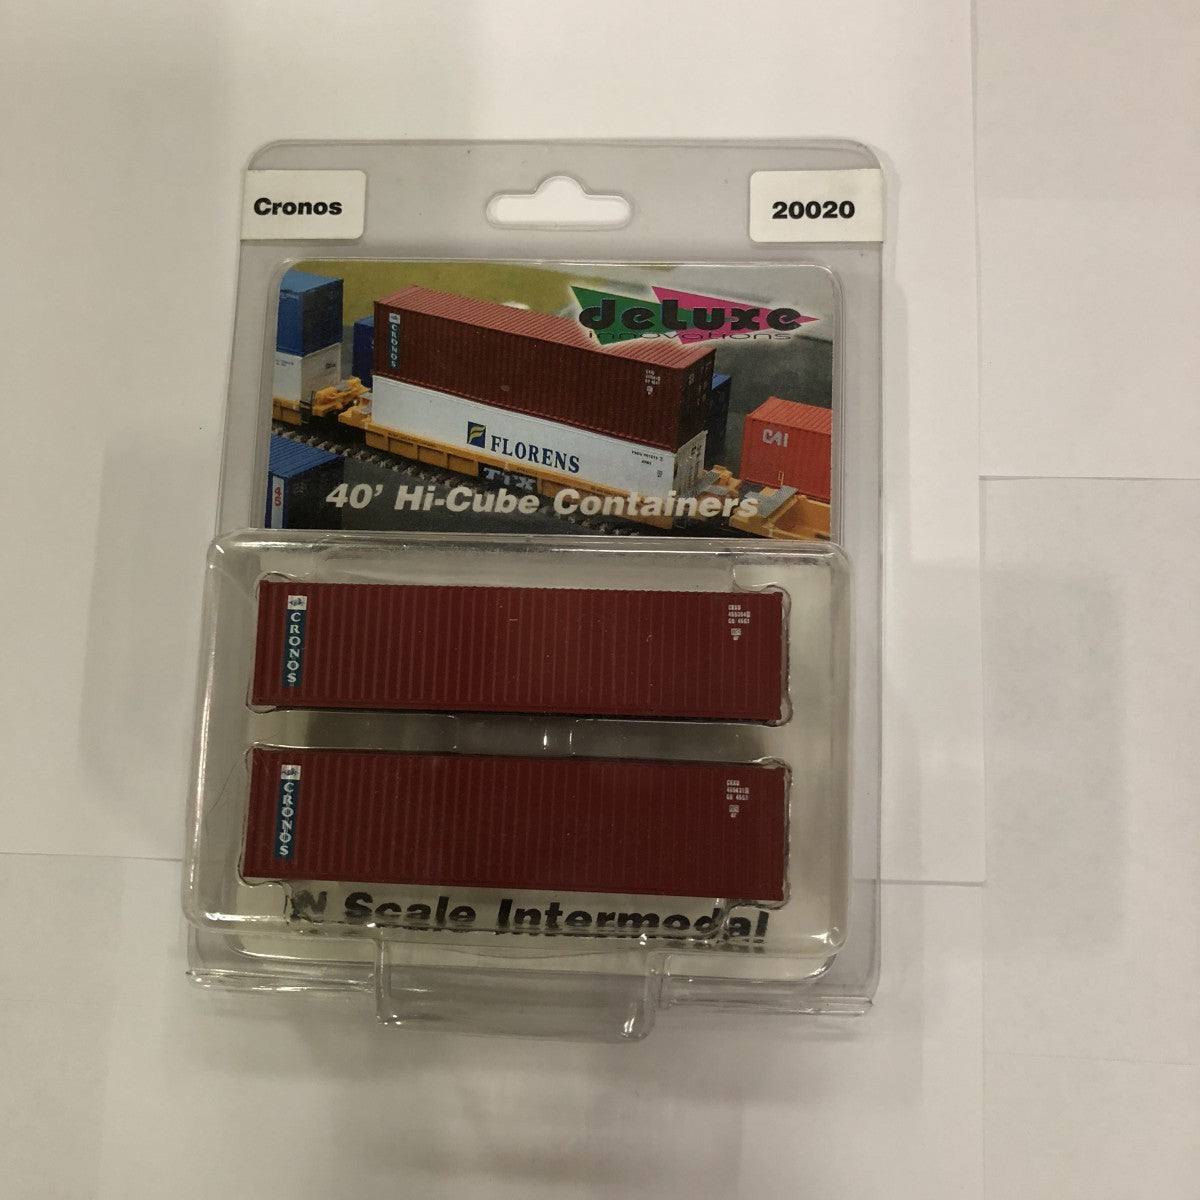 Deluxe Innovations 20020 N Scale Cronos 40' Hi-Cube Containers (Pack of 2)